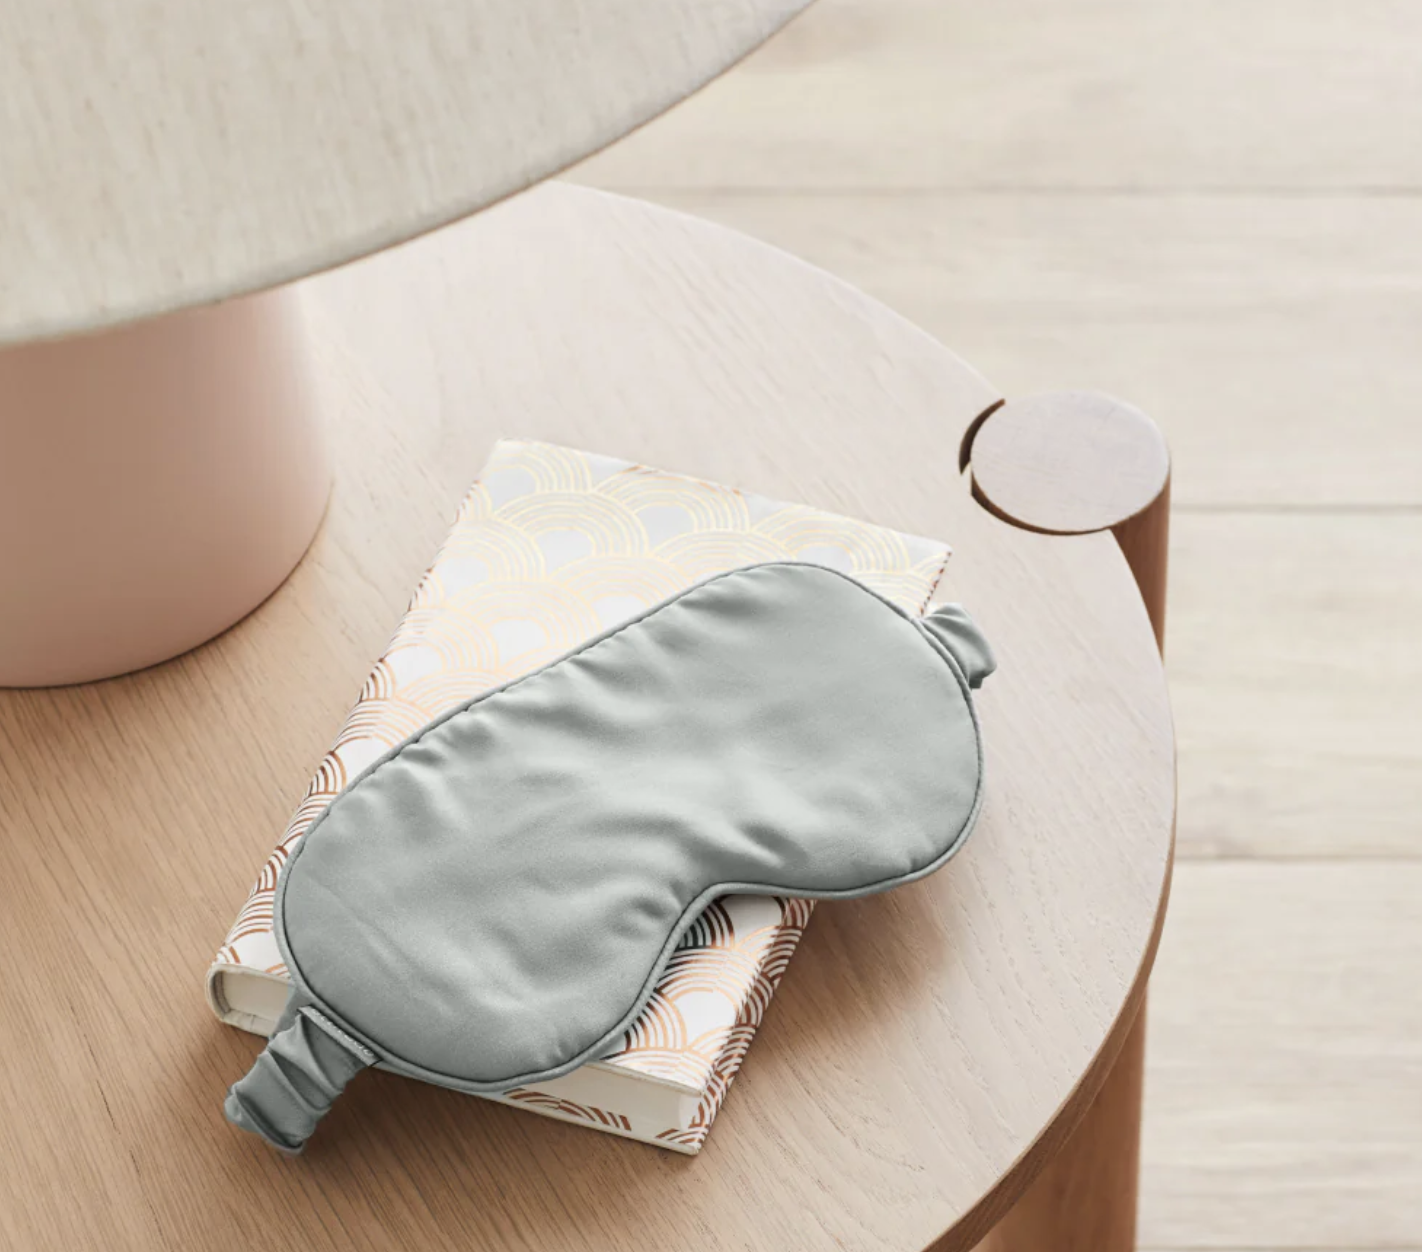 Ettitude bamboo eye mask comes highly recommended to block out sunlight